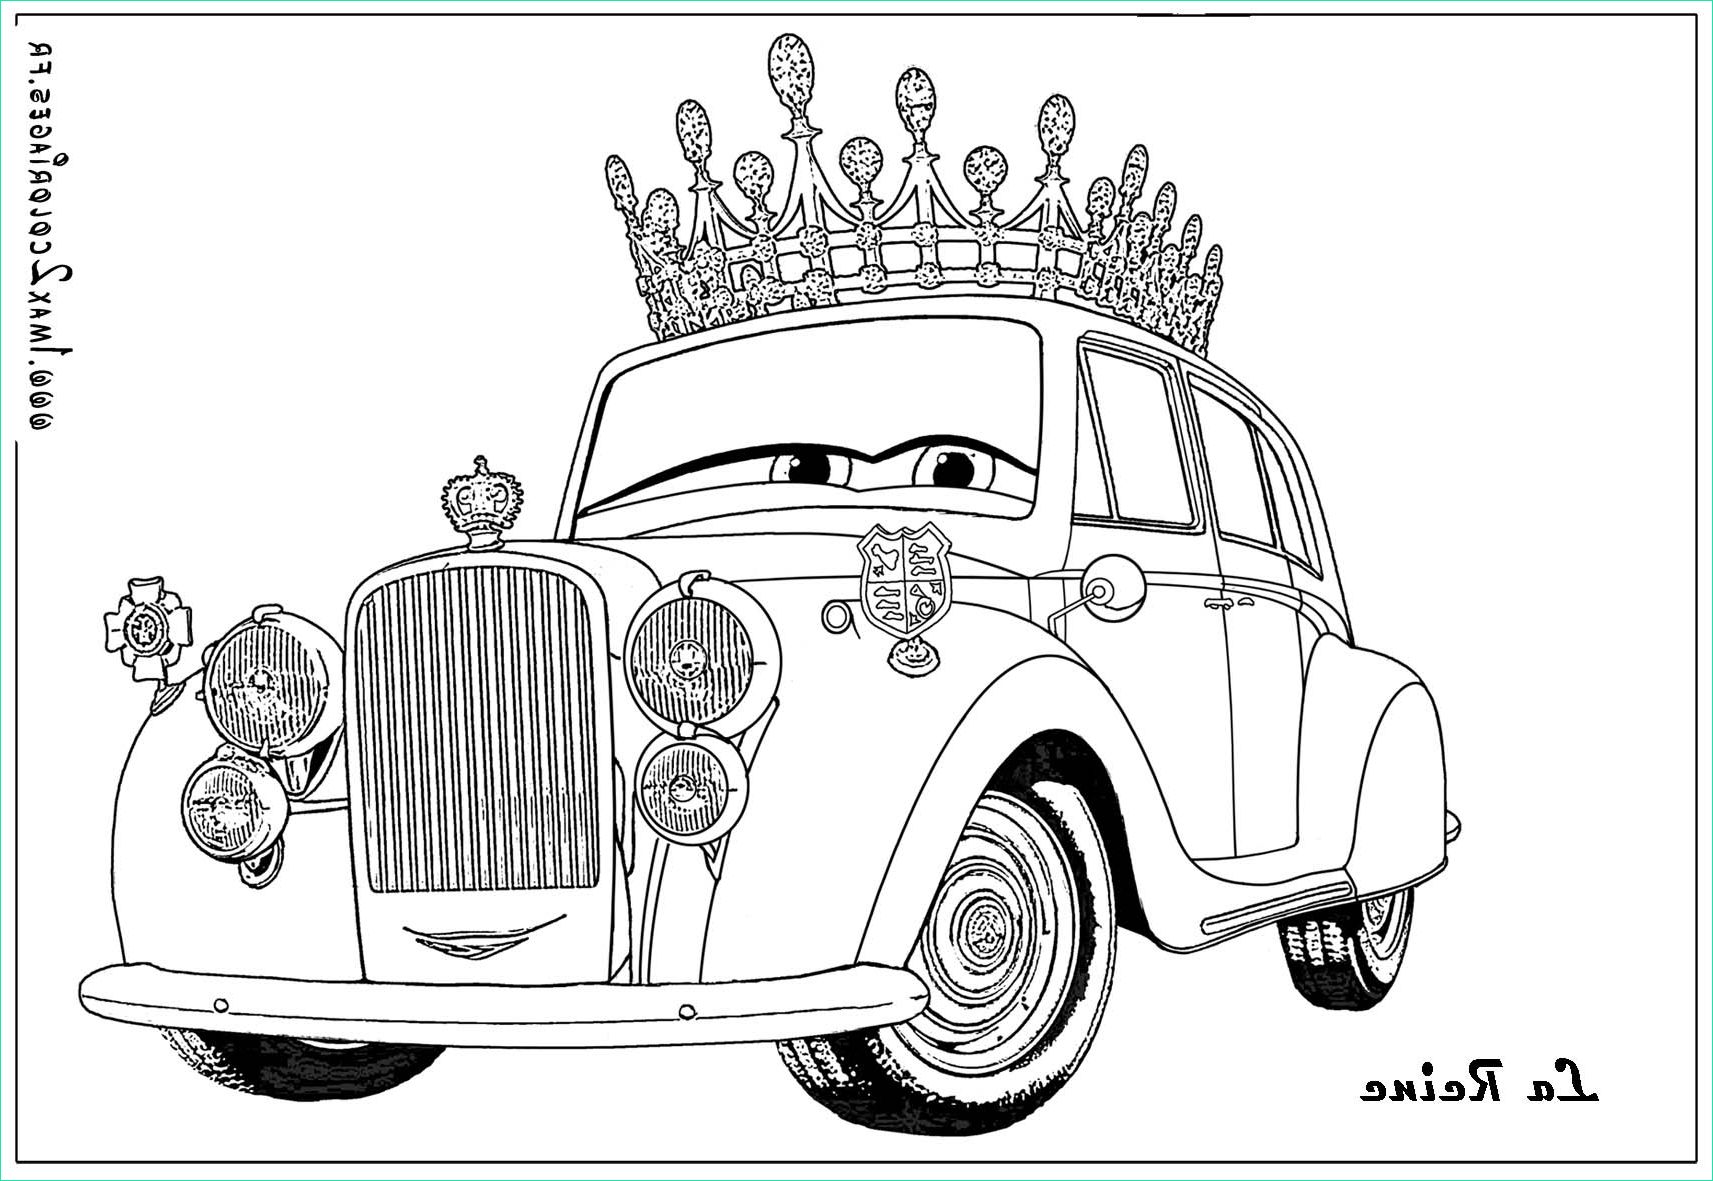 image=cars 2 coloriages cars2 10 1